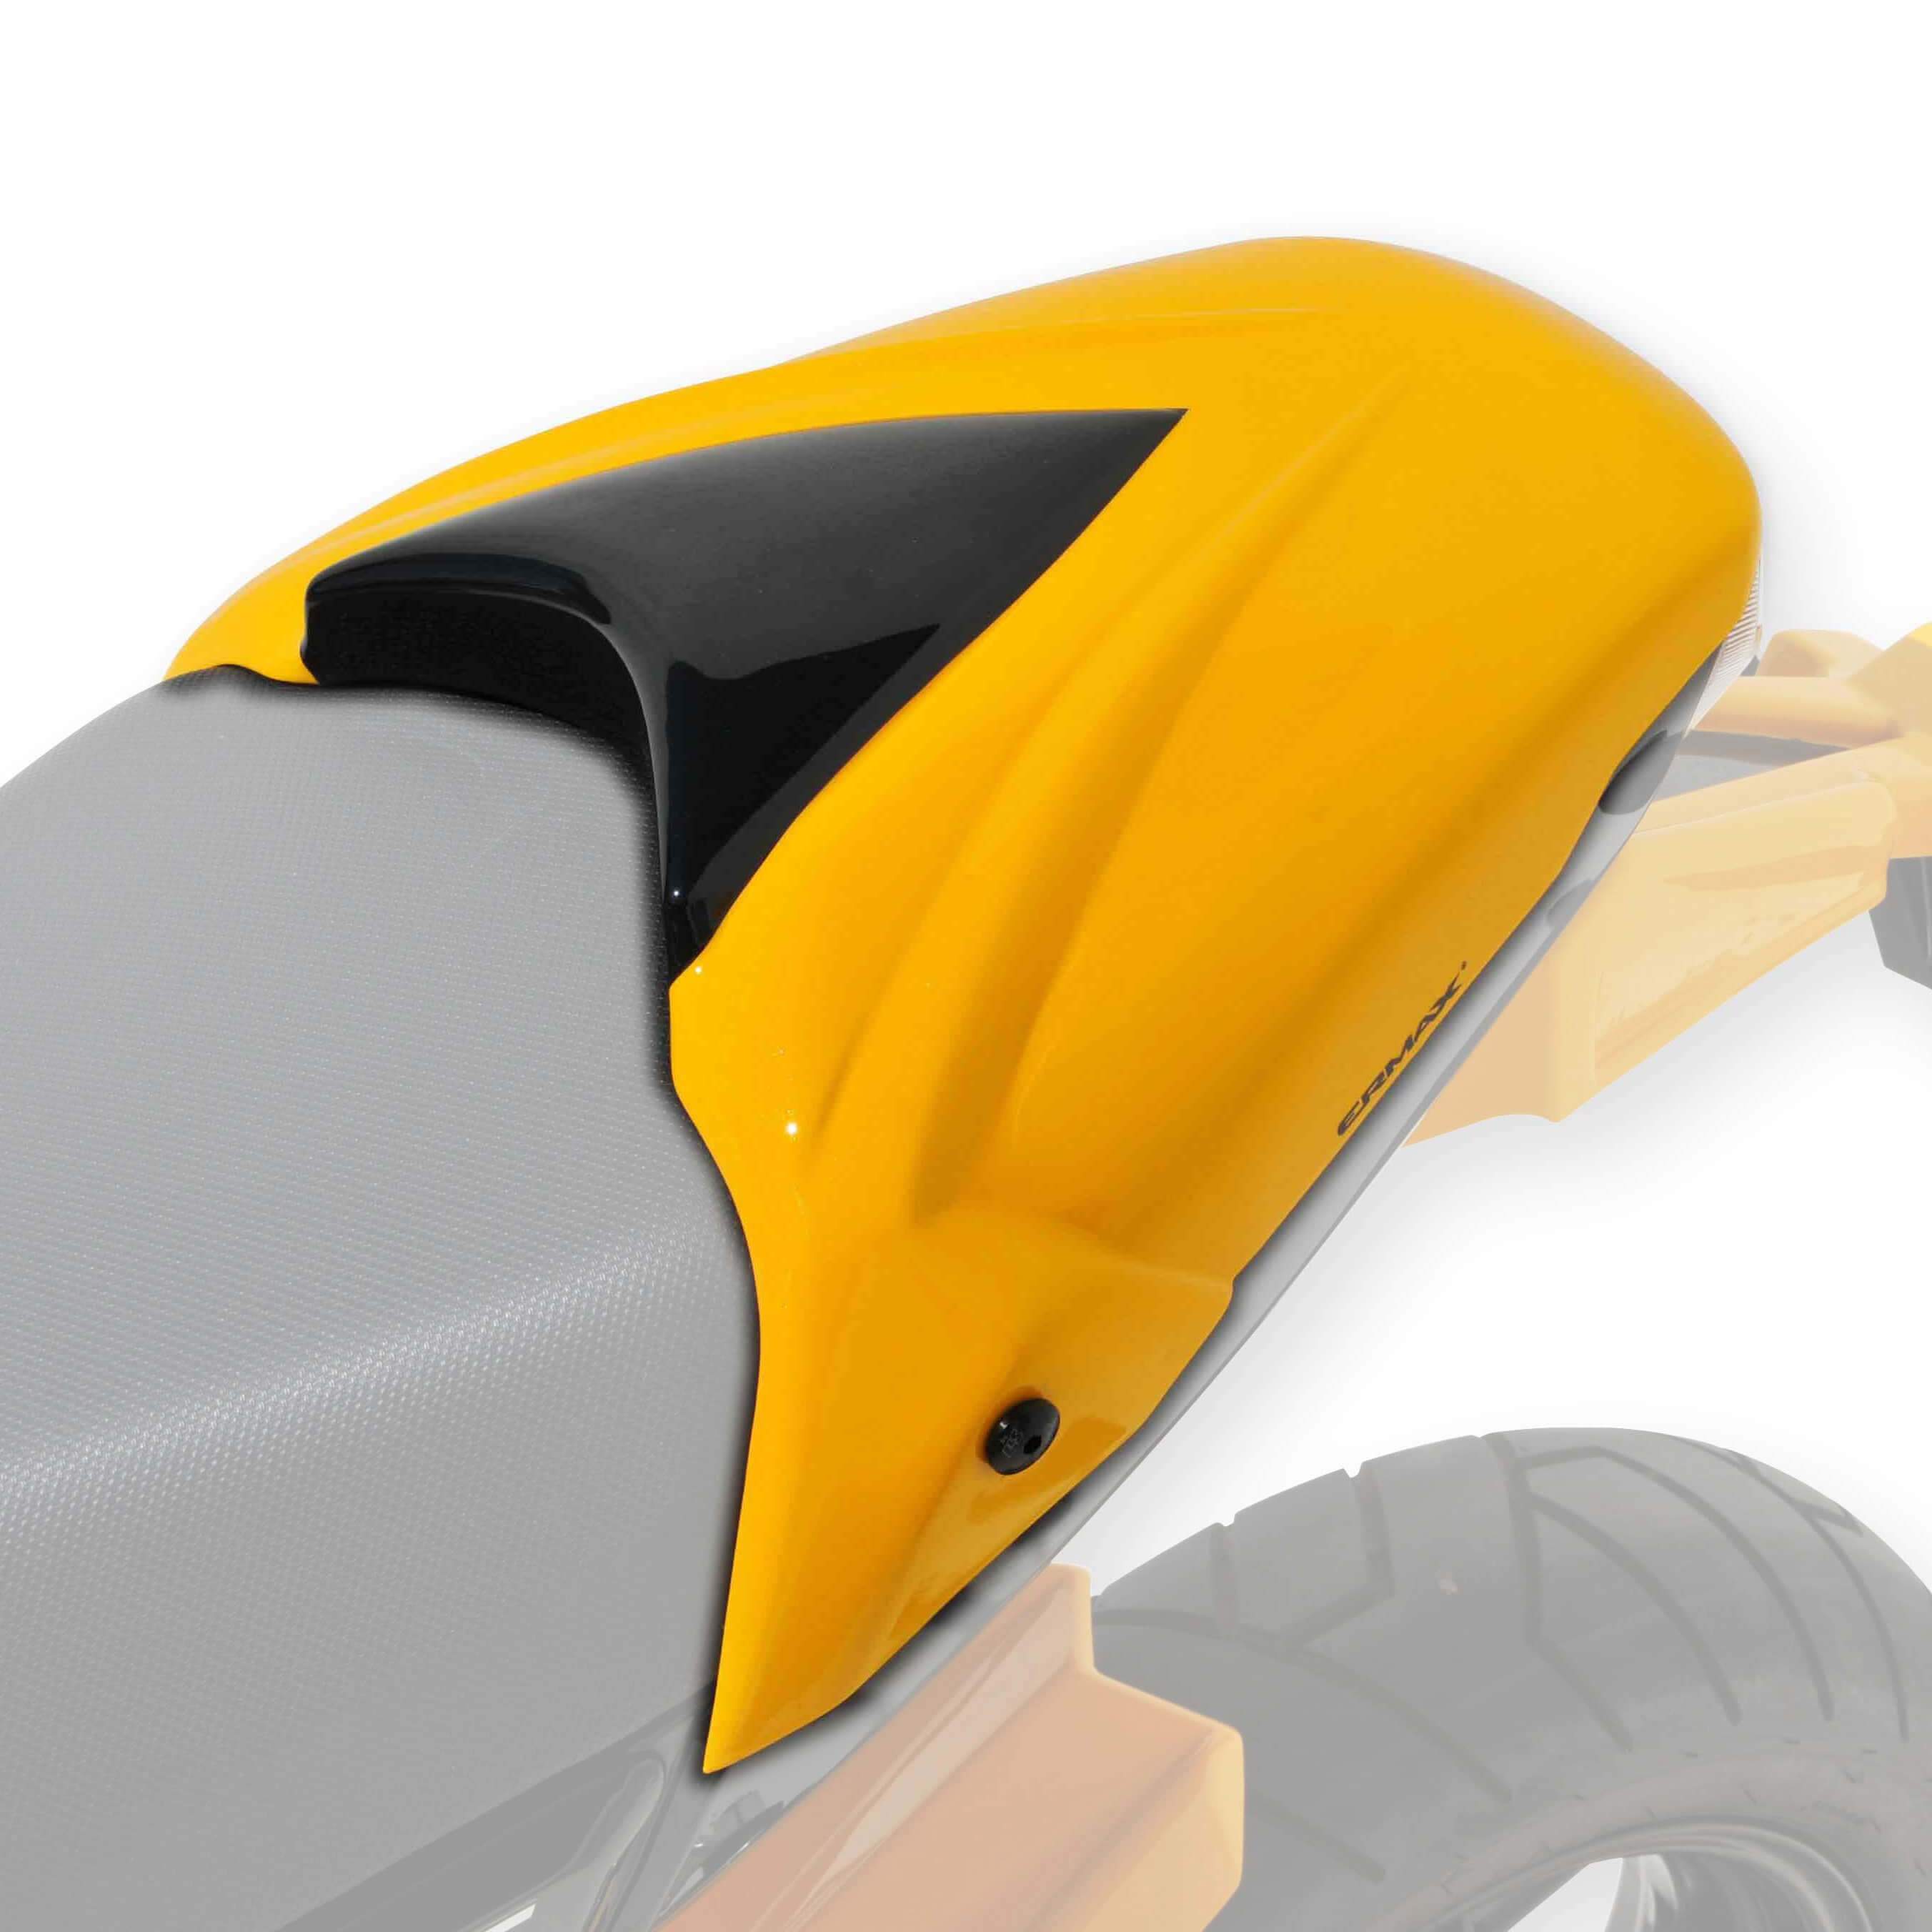 Ermax Seat Cowl | Light Metallic Yellow (Pearl Queen Bee Yellow) | Honda MSX 125 2013>2016-E850140138-Seat Cowls-Pyramid Motorcycle Accessories